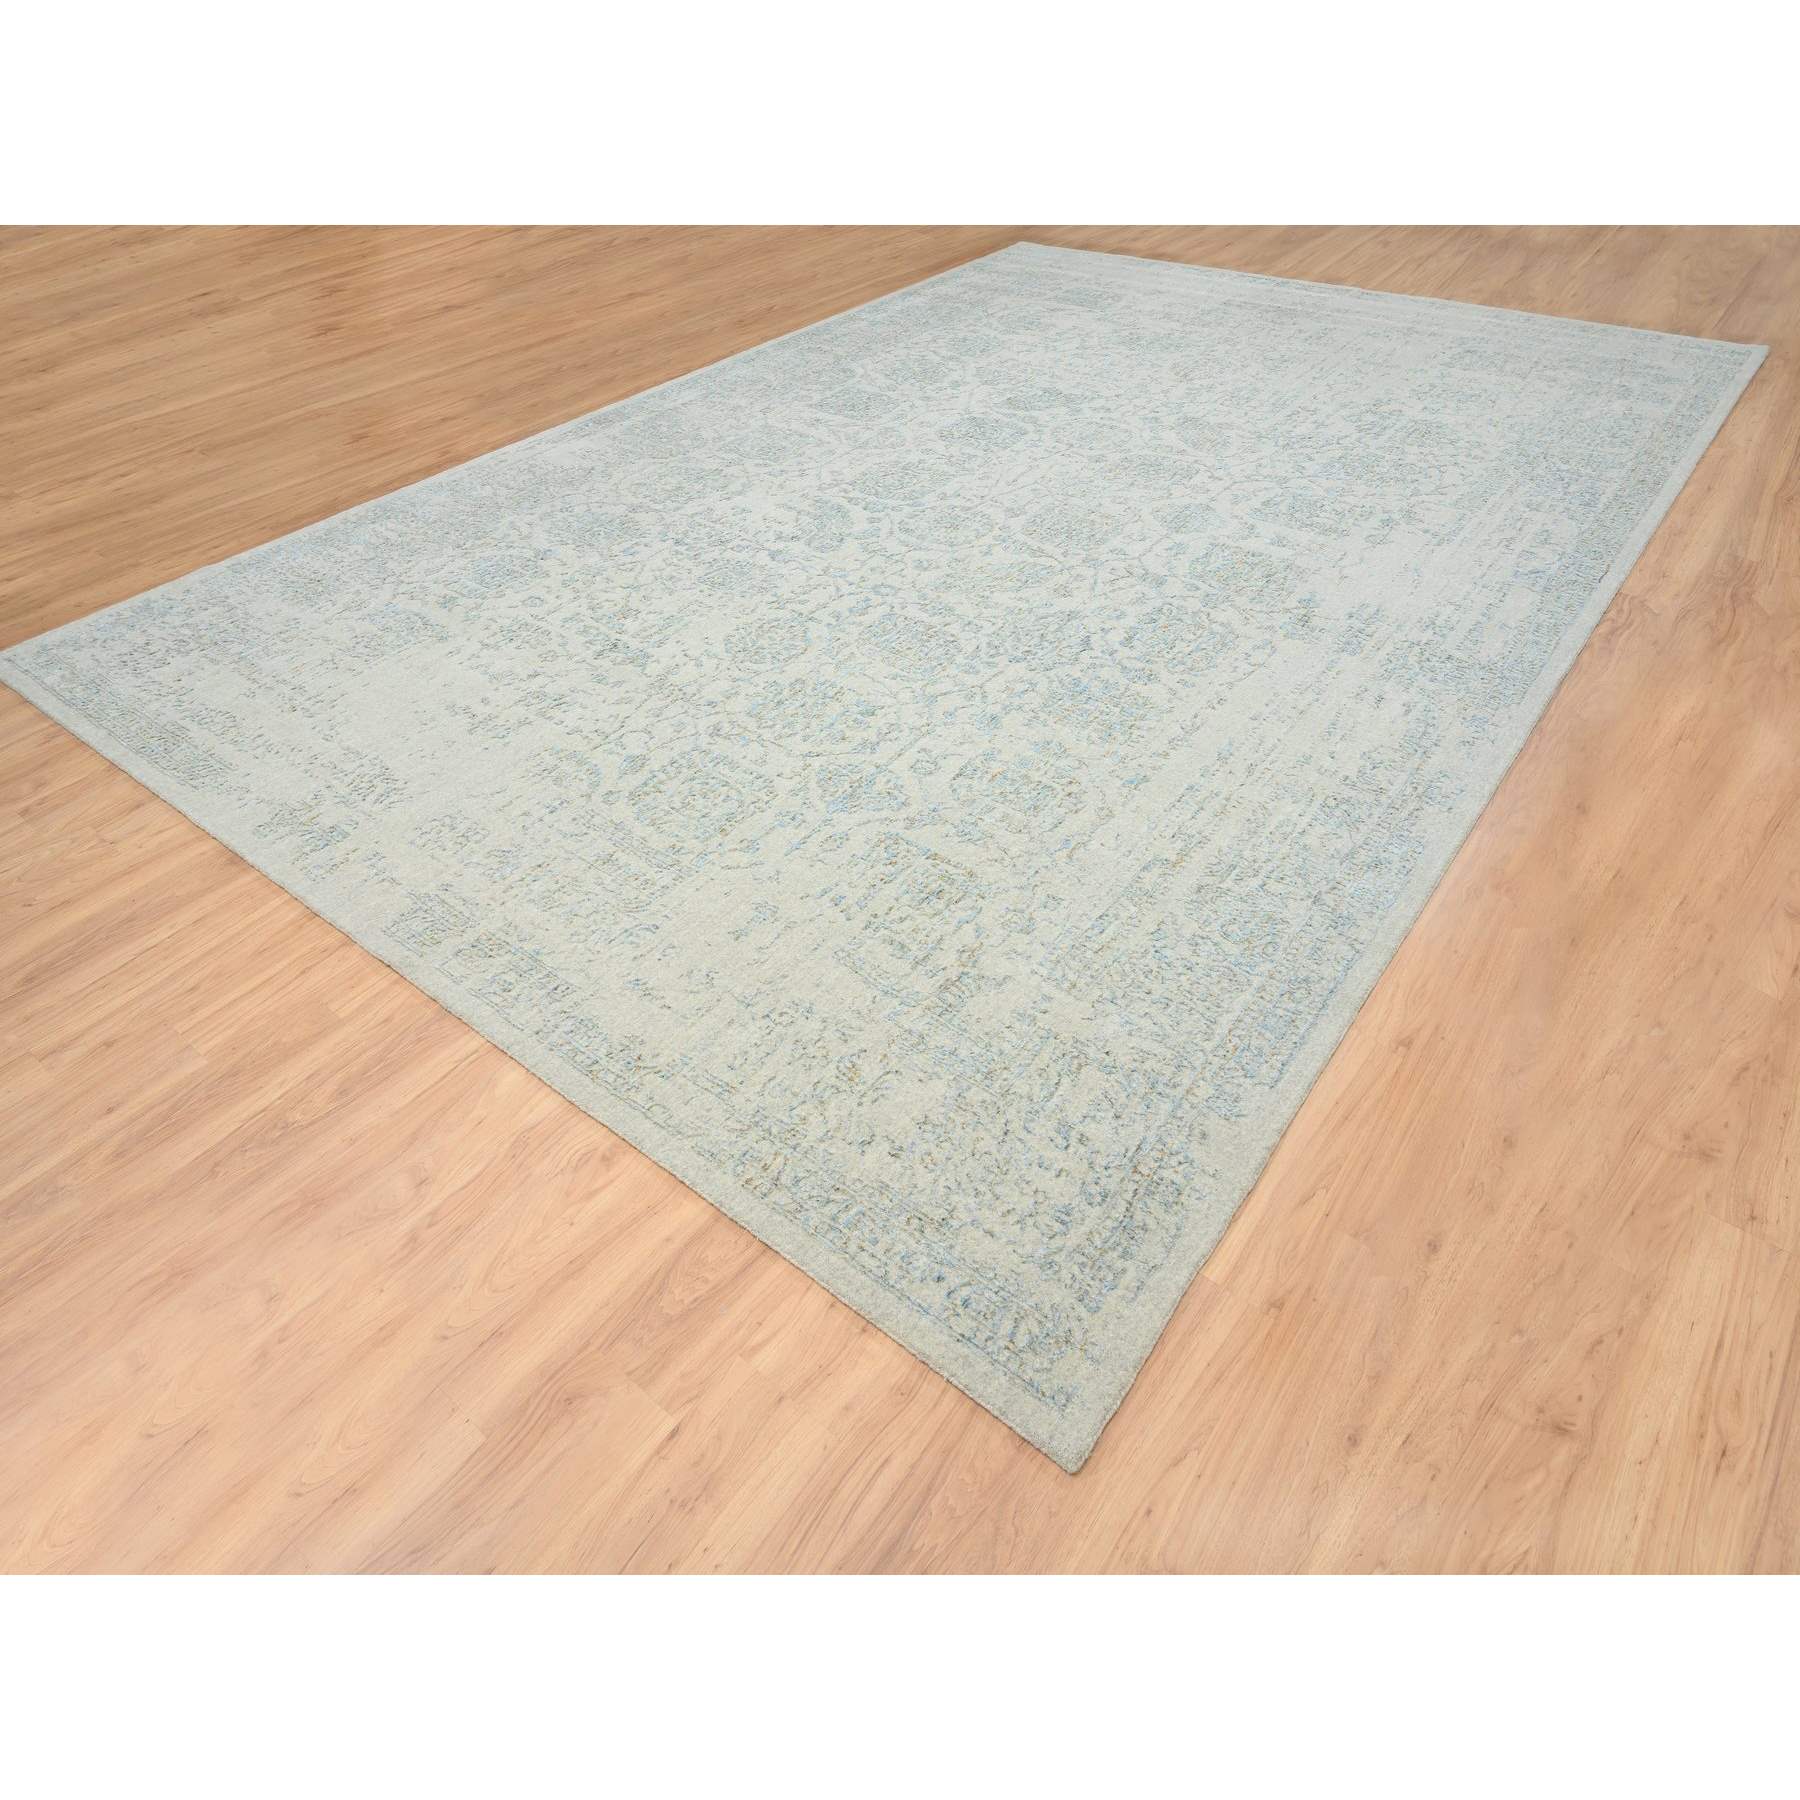 Transitional-Hand-Loomed-Rug-322725